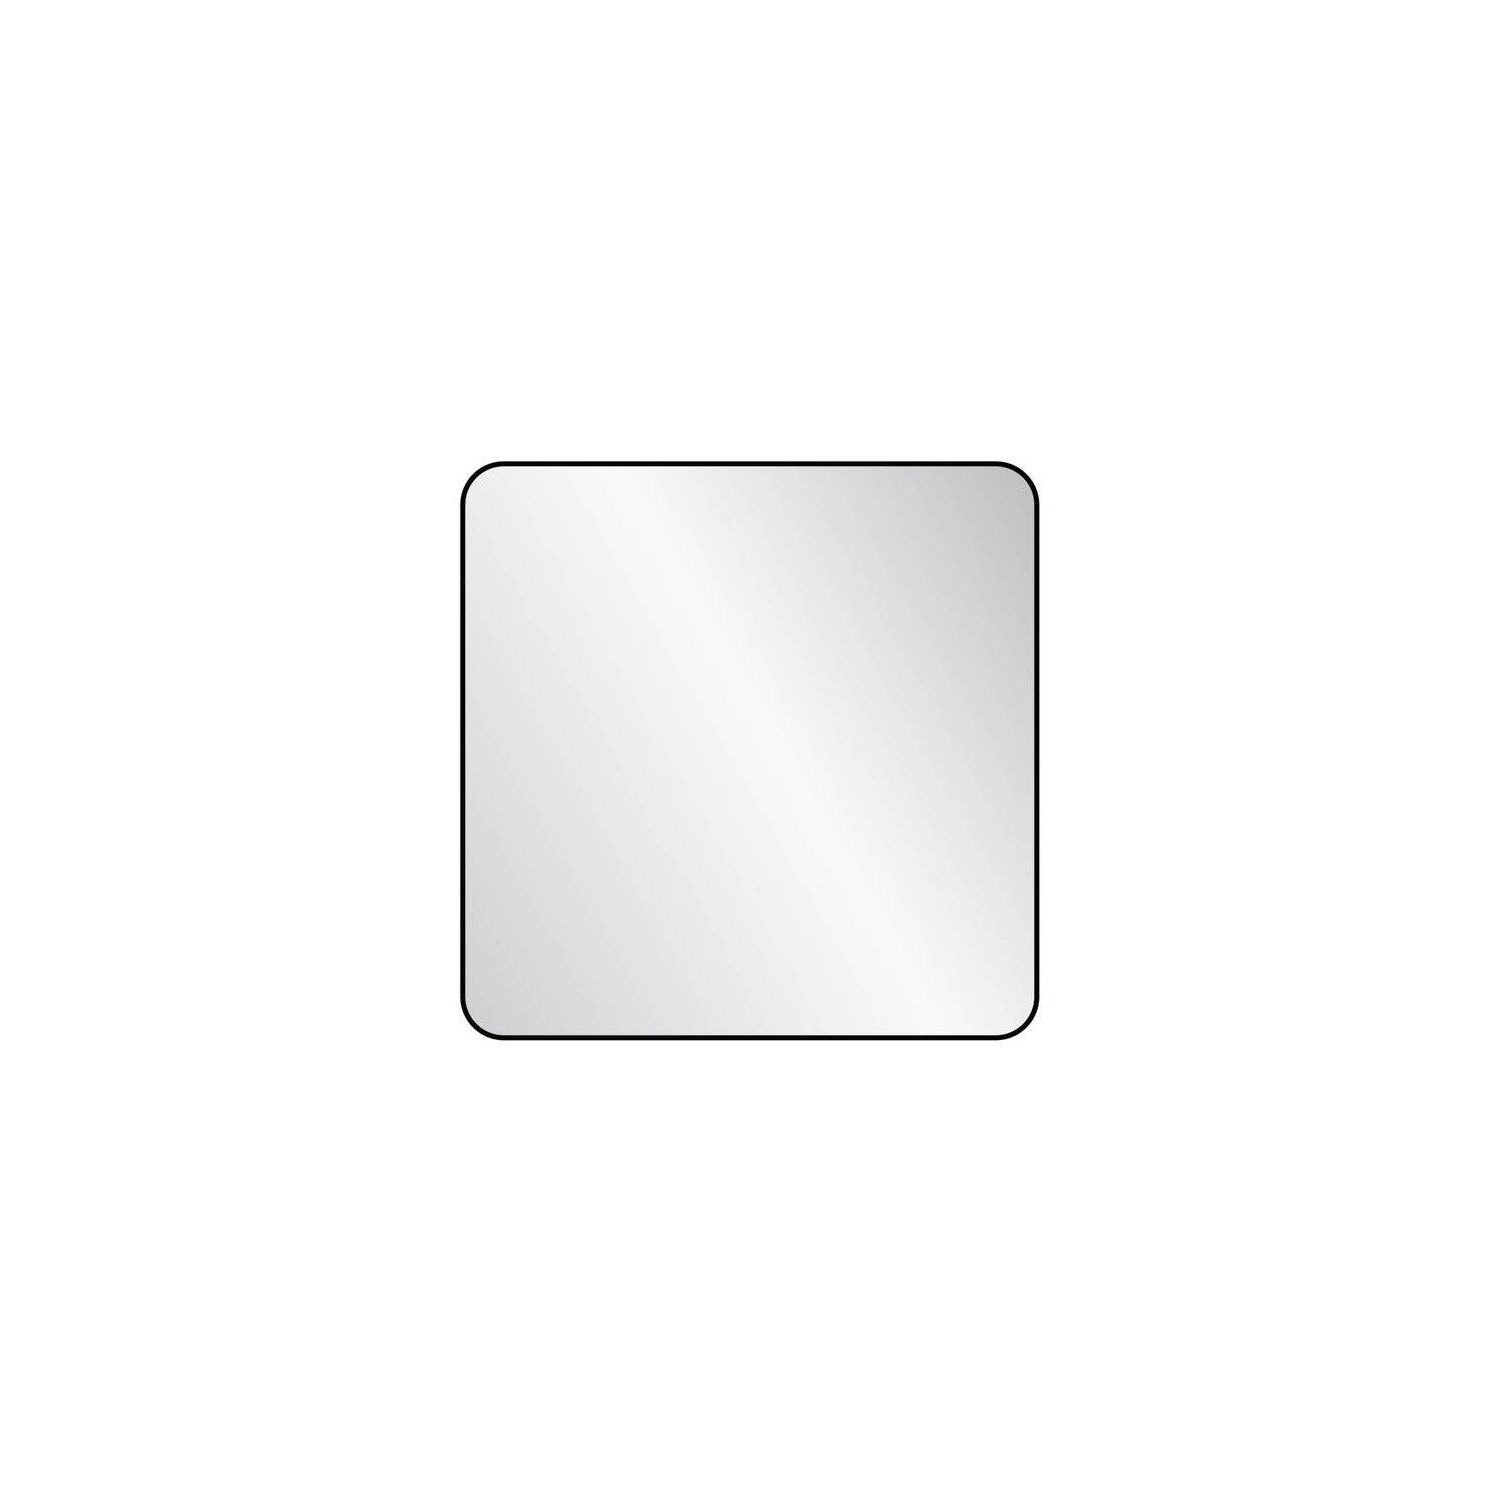 Archer Metal Square Wall Mirror Large 80Cm - image 1